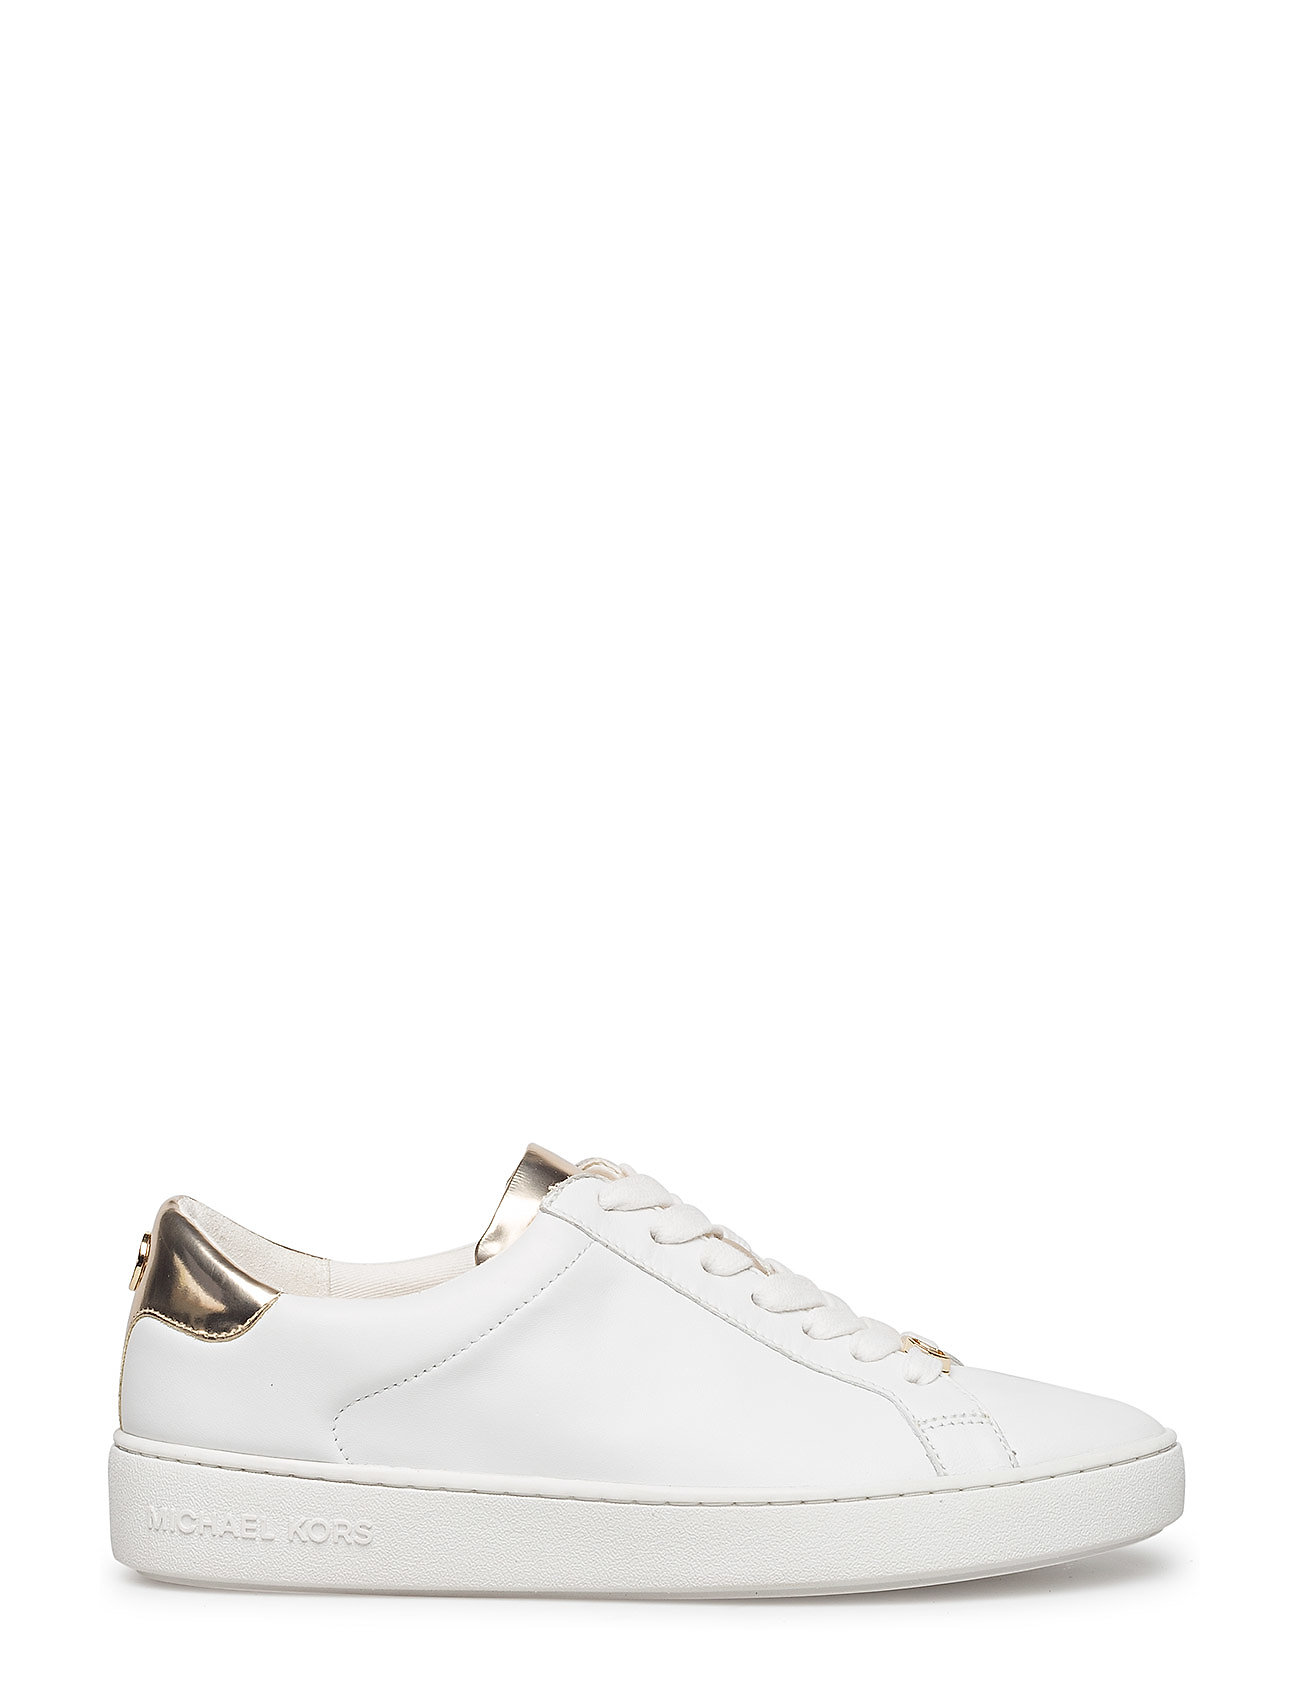 log uddanne Footpad Guld Michael Kors Irving Lace Up Low-top Sneakers Hvid Michael Kors Shoes  sneakers for dame - Pashion.dk